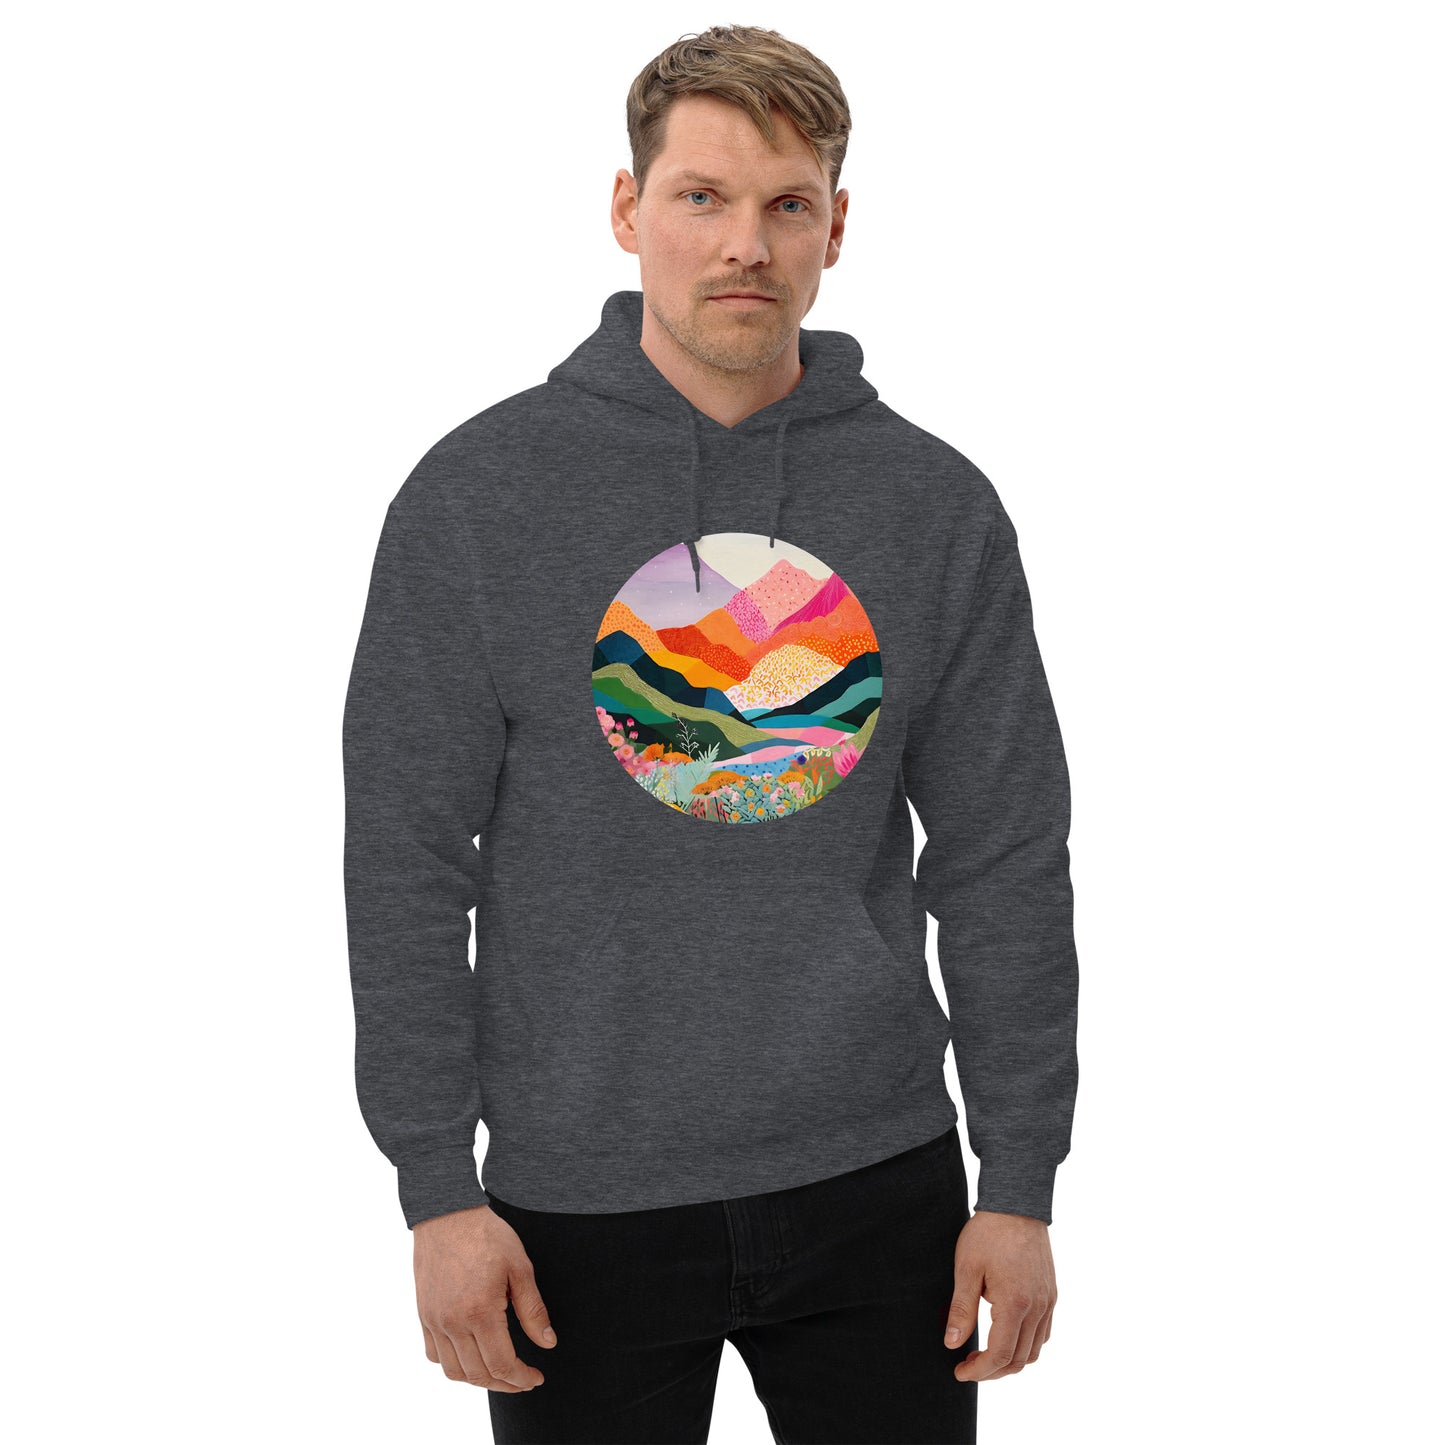 Landscape, Nature, Vibrant colors, Colorful, Mountains, Flowers, Colors, Painting, Tranquil, Art, Scenery, Beautiful, Season, Unisex, Hoodie